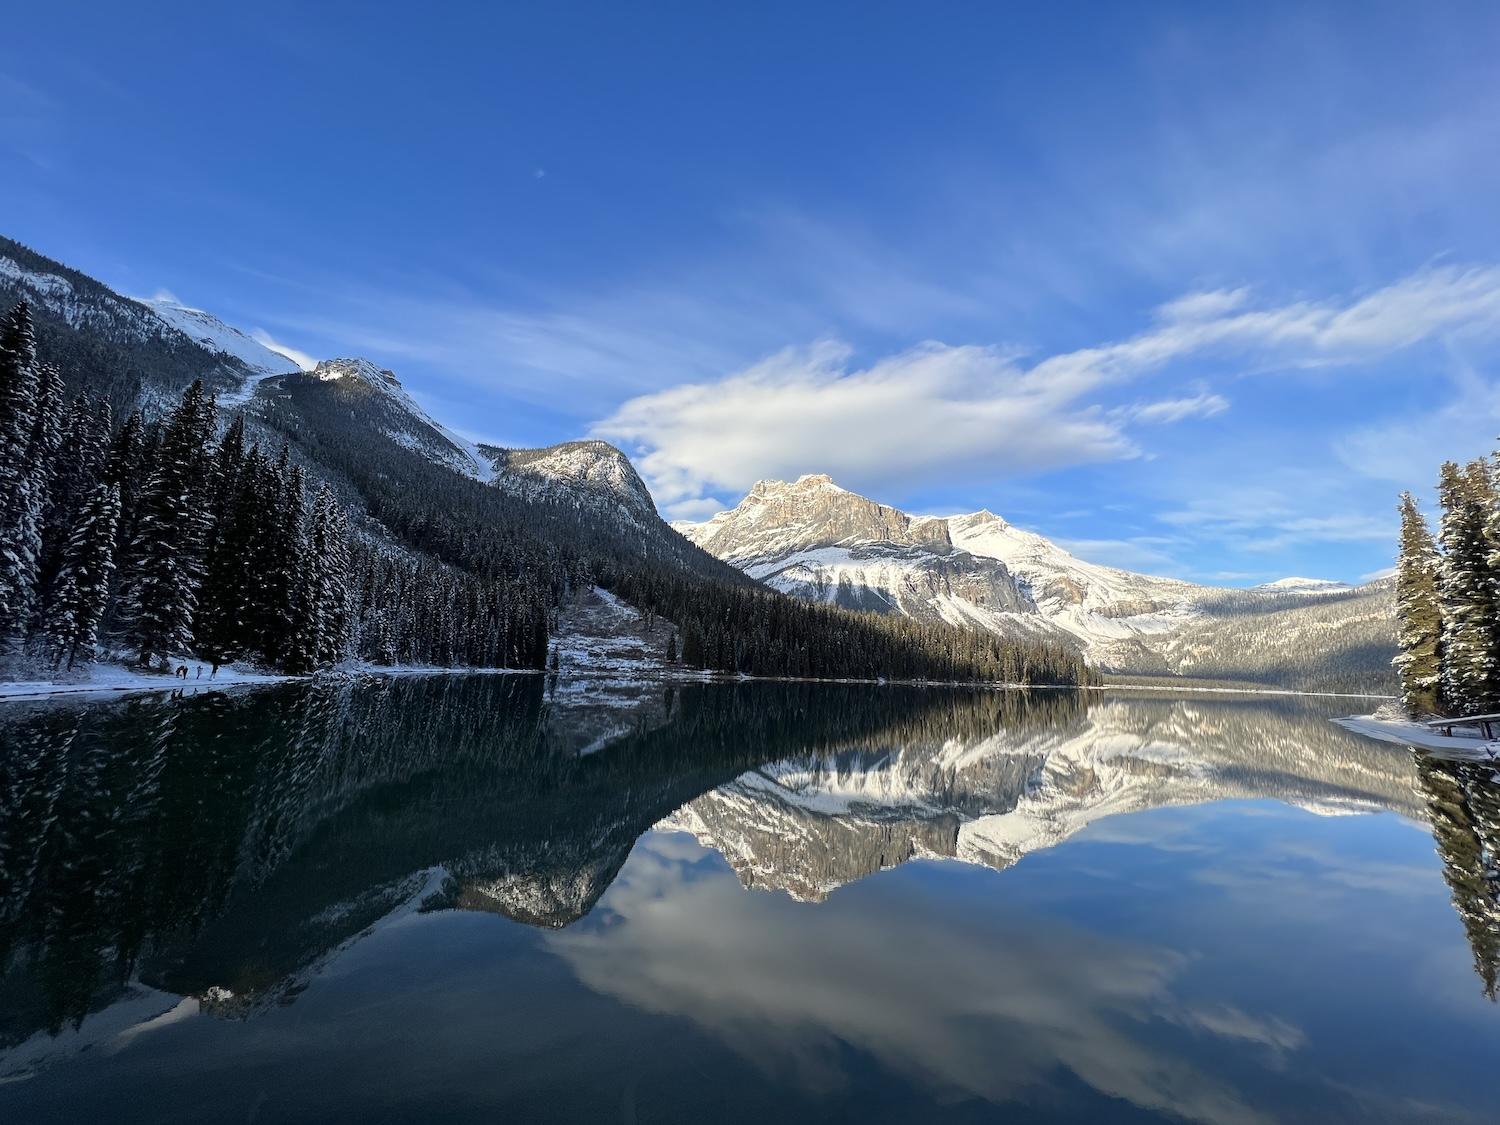 Beautiful Emerald Lake is one of the bodies of water in Yoho National Park that has been closed due to whirling disease.